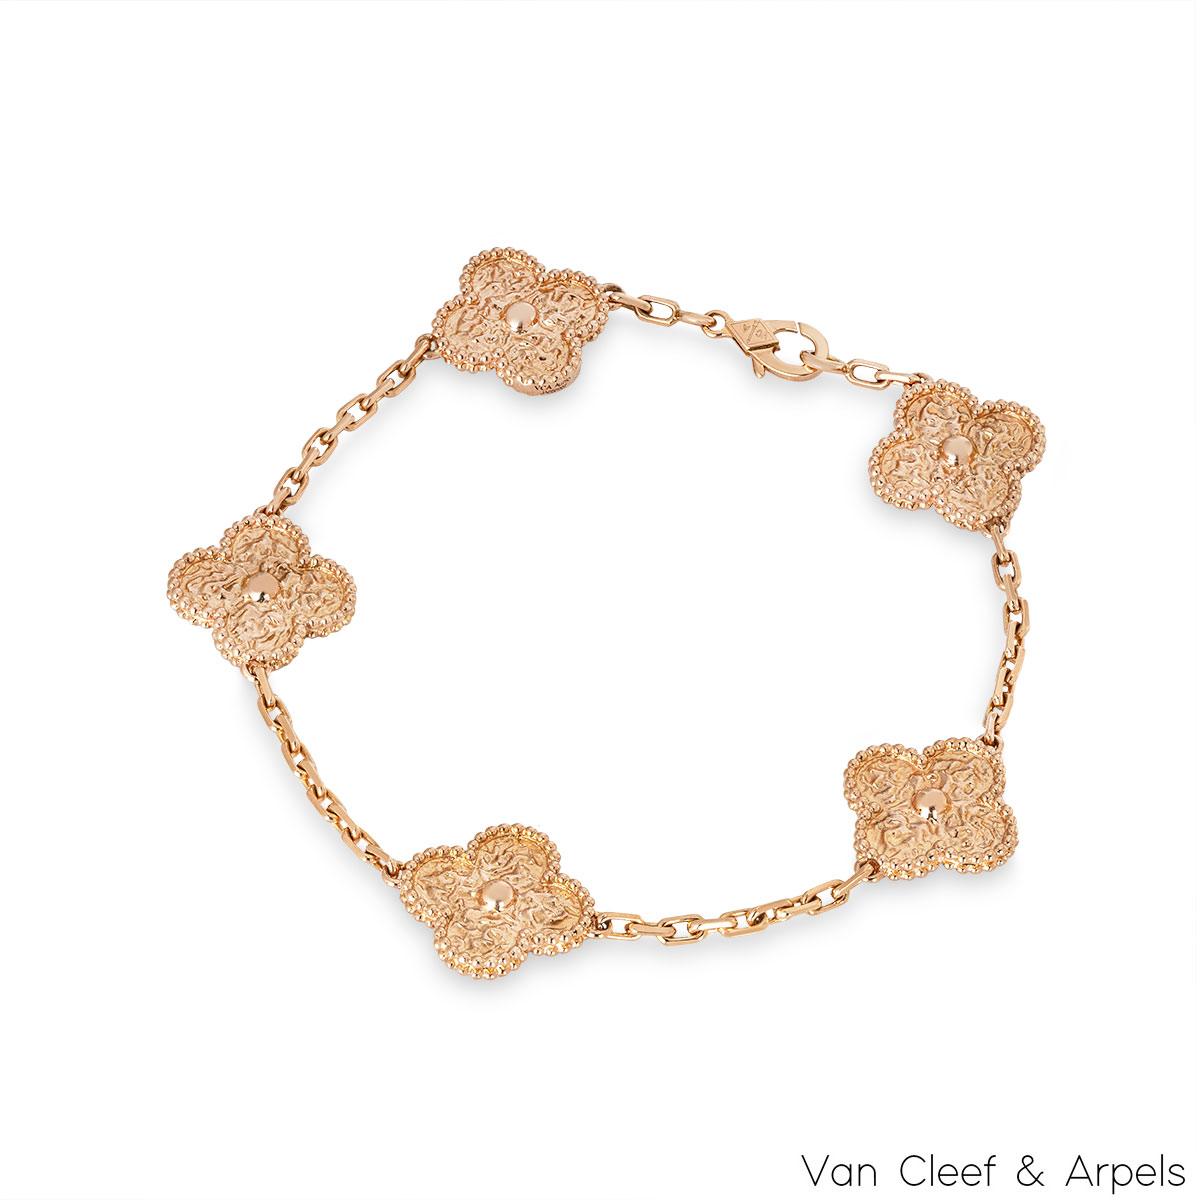 A beautiful 18k rose gold Vintage Alhambra necklace by Van Cleef & Arpels. The bracelet features 5 rose gold clover motifs with a beaded border. Measuring 7.5 inches in length, the bracelet finishes with a lobster hallmark clasp and has a gross